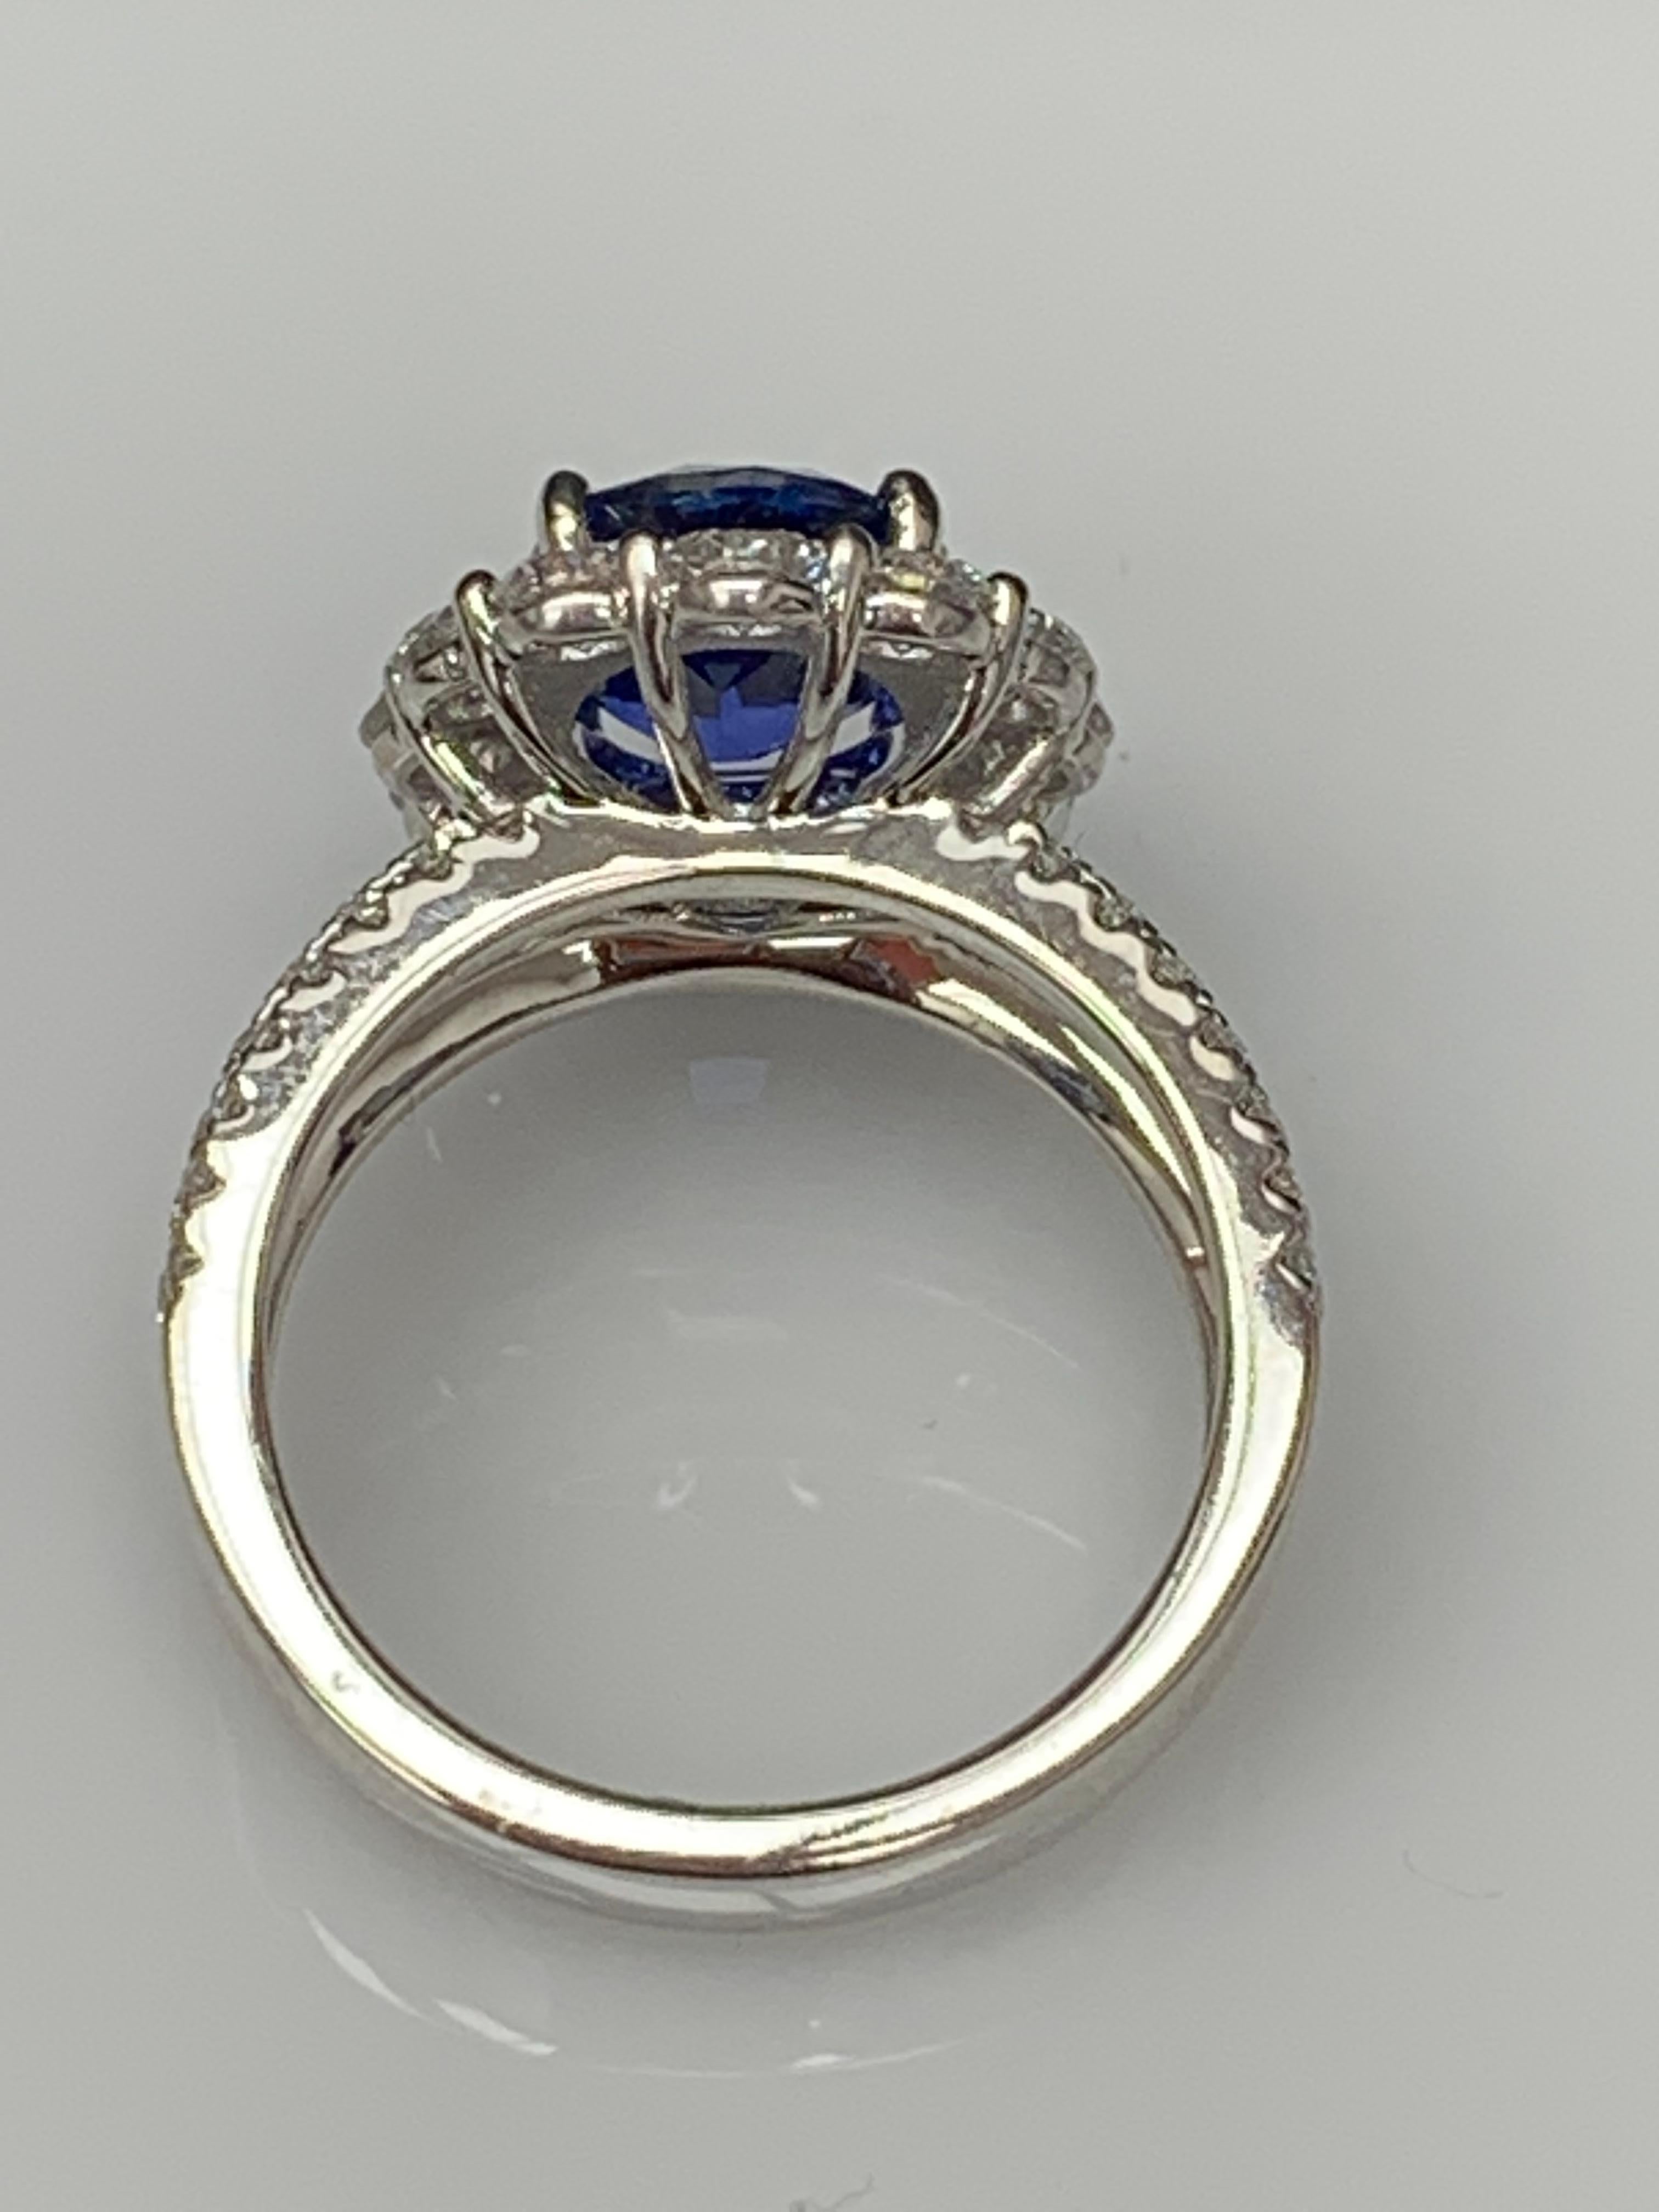 Contemporary 3.09 Carat Oval Shape Blue Sapphire and Diamond Flower Ring in 18K White Gold For Sale